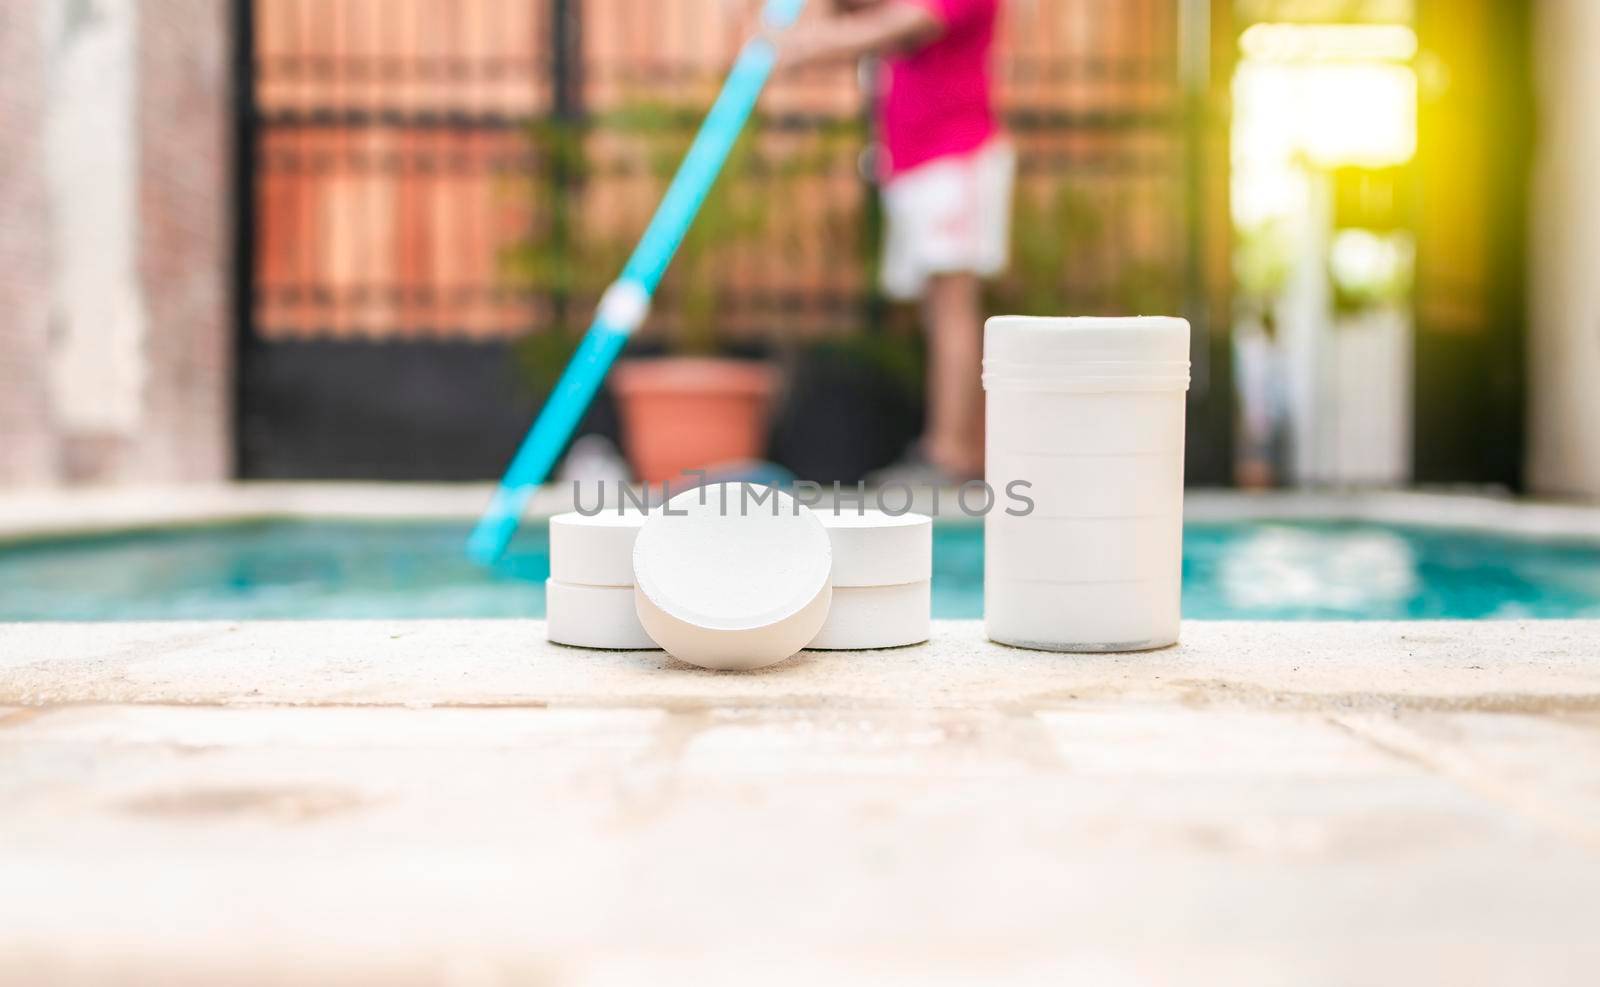 chlorine tablets to clean swimming pool, Close up of chlorine tablets to clean swimming pools, concept of chlorine tablets to sanitize swimming pools